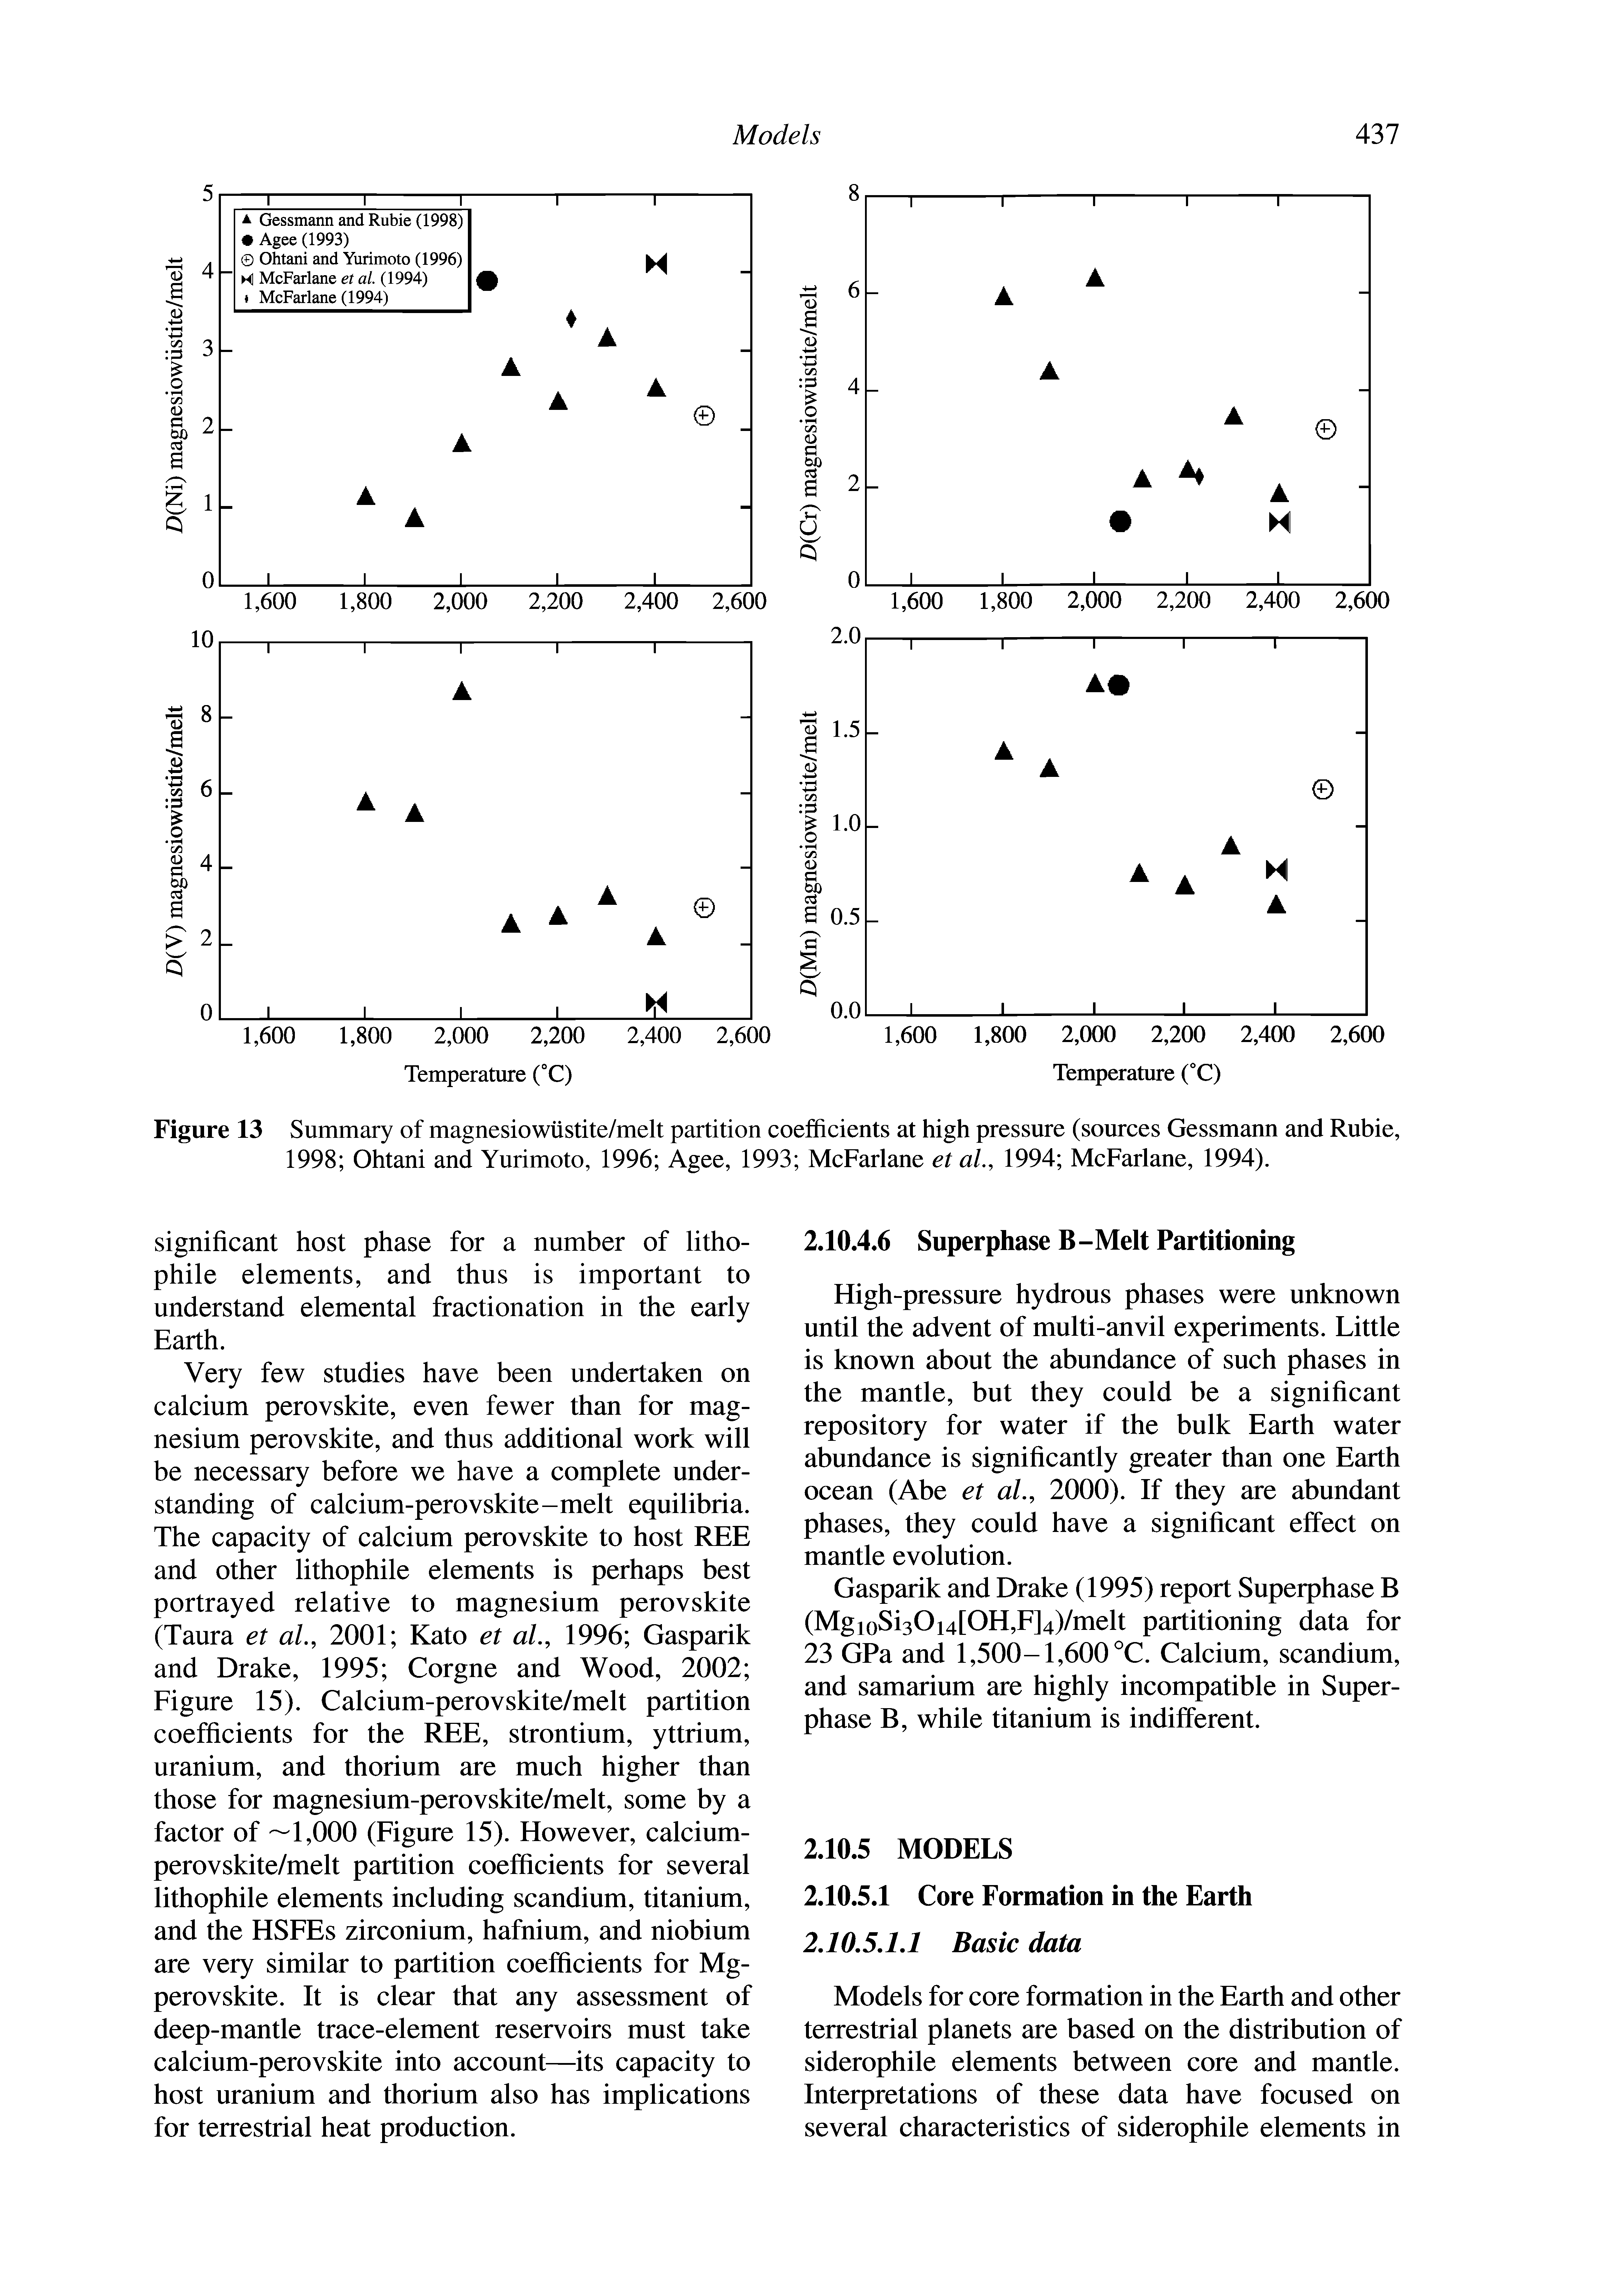 Figure 13 Summary of magnesiowiistite/melt partition coefficients at high pressure (sources Gessmann and Rubie, 1998 Ohtani and Yurimoto, 1996 Agee, 1993 McFarlane et aL, 1994 McFarlane, 1994).